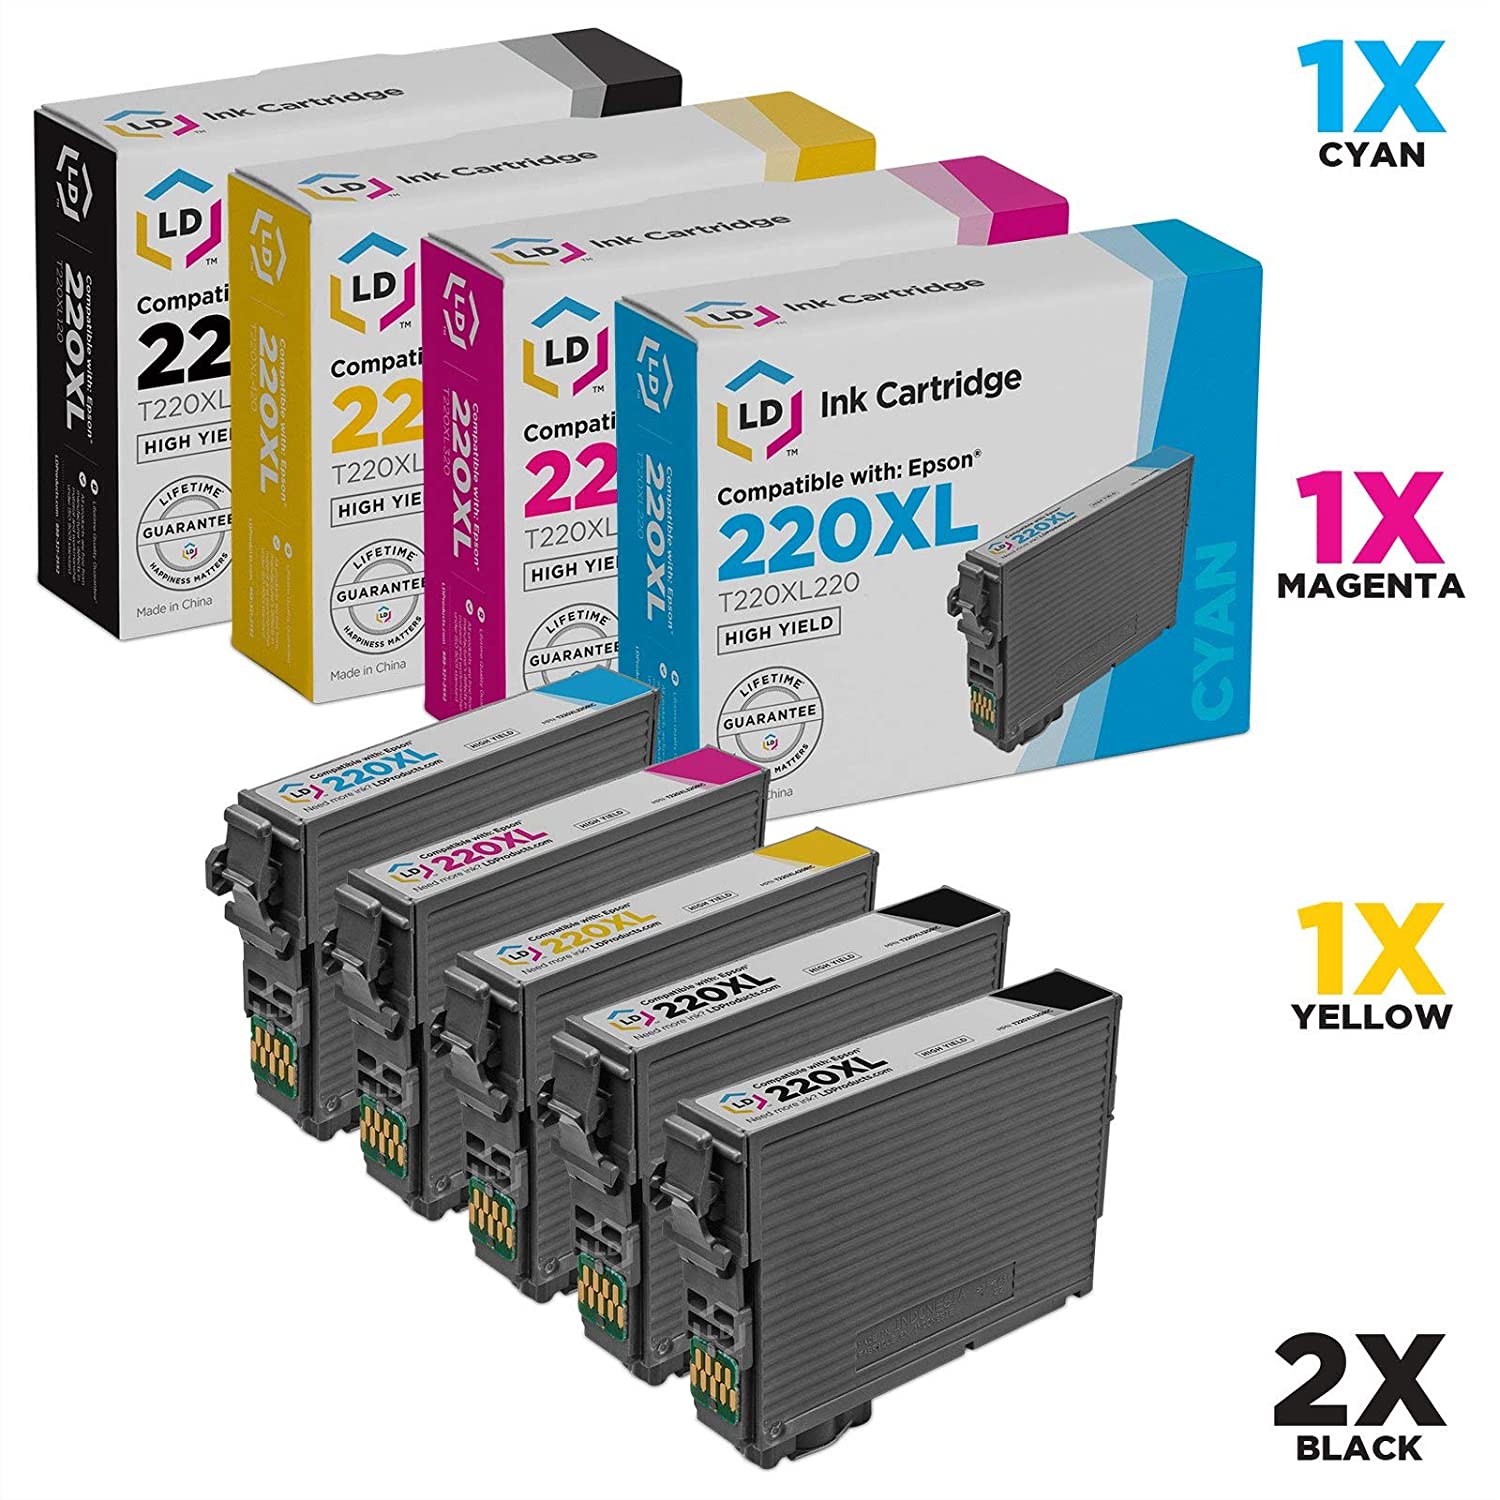 LD Products Remanufactured Ink Cartridge Replacement for Epson 220XL High Yield